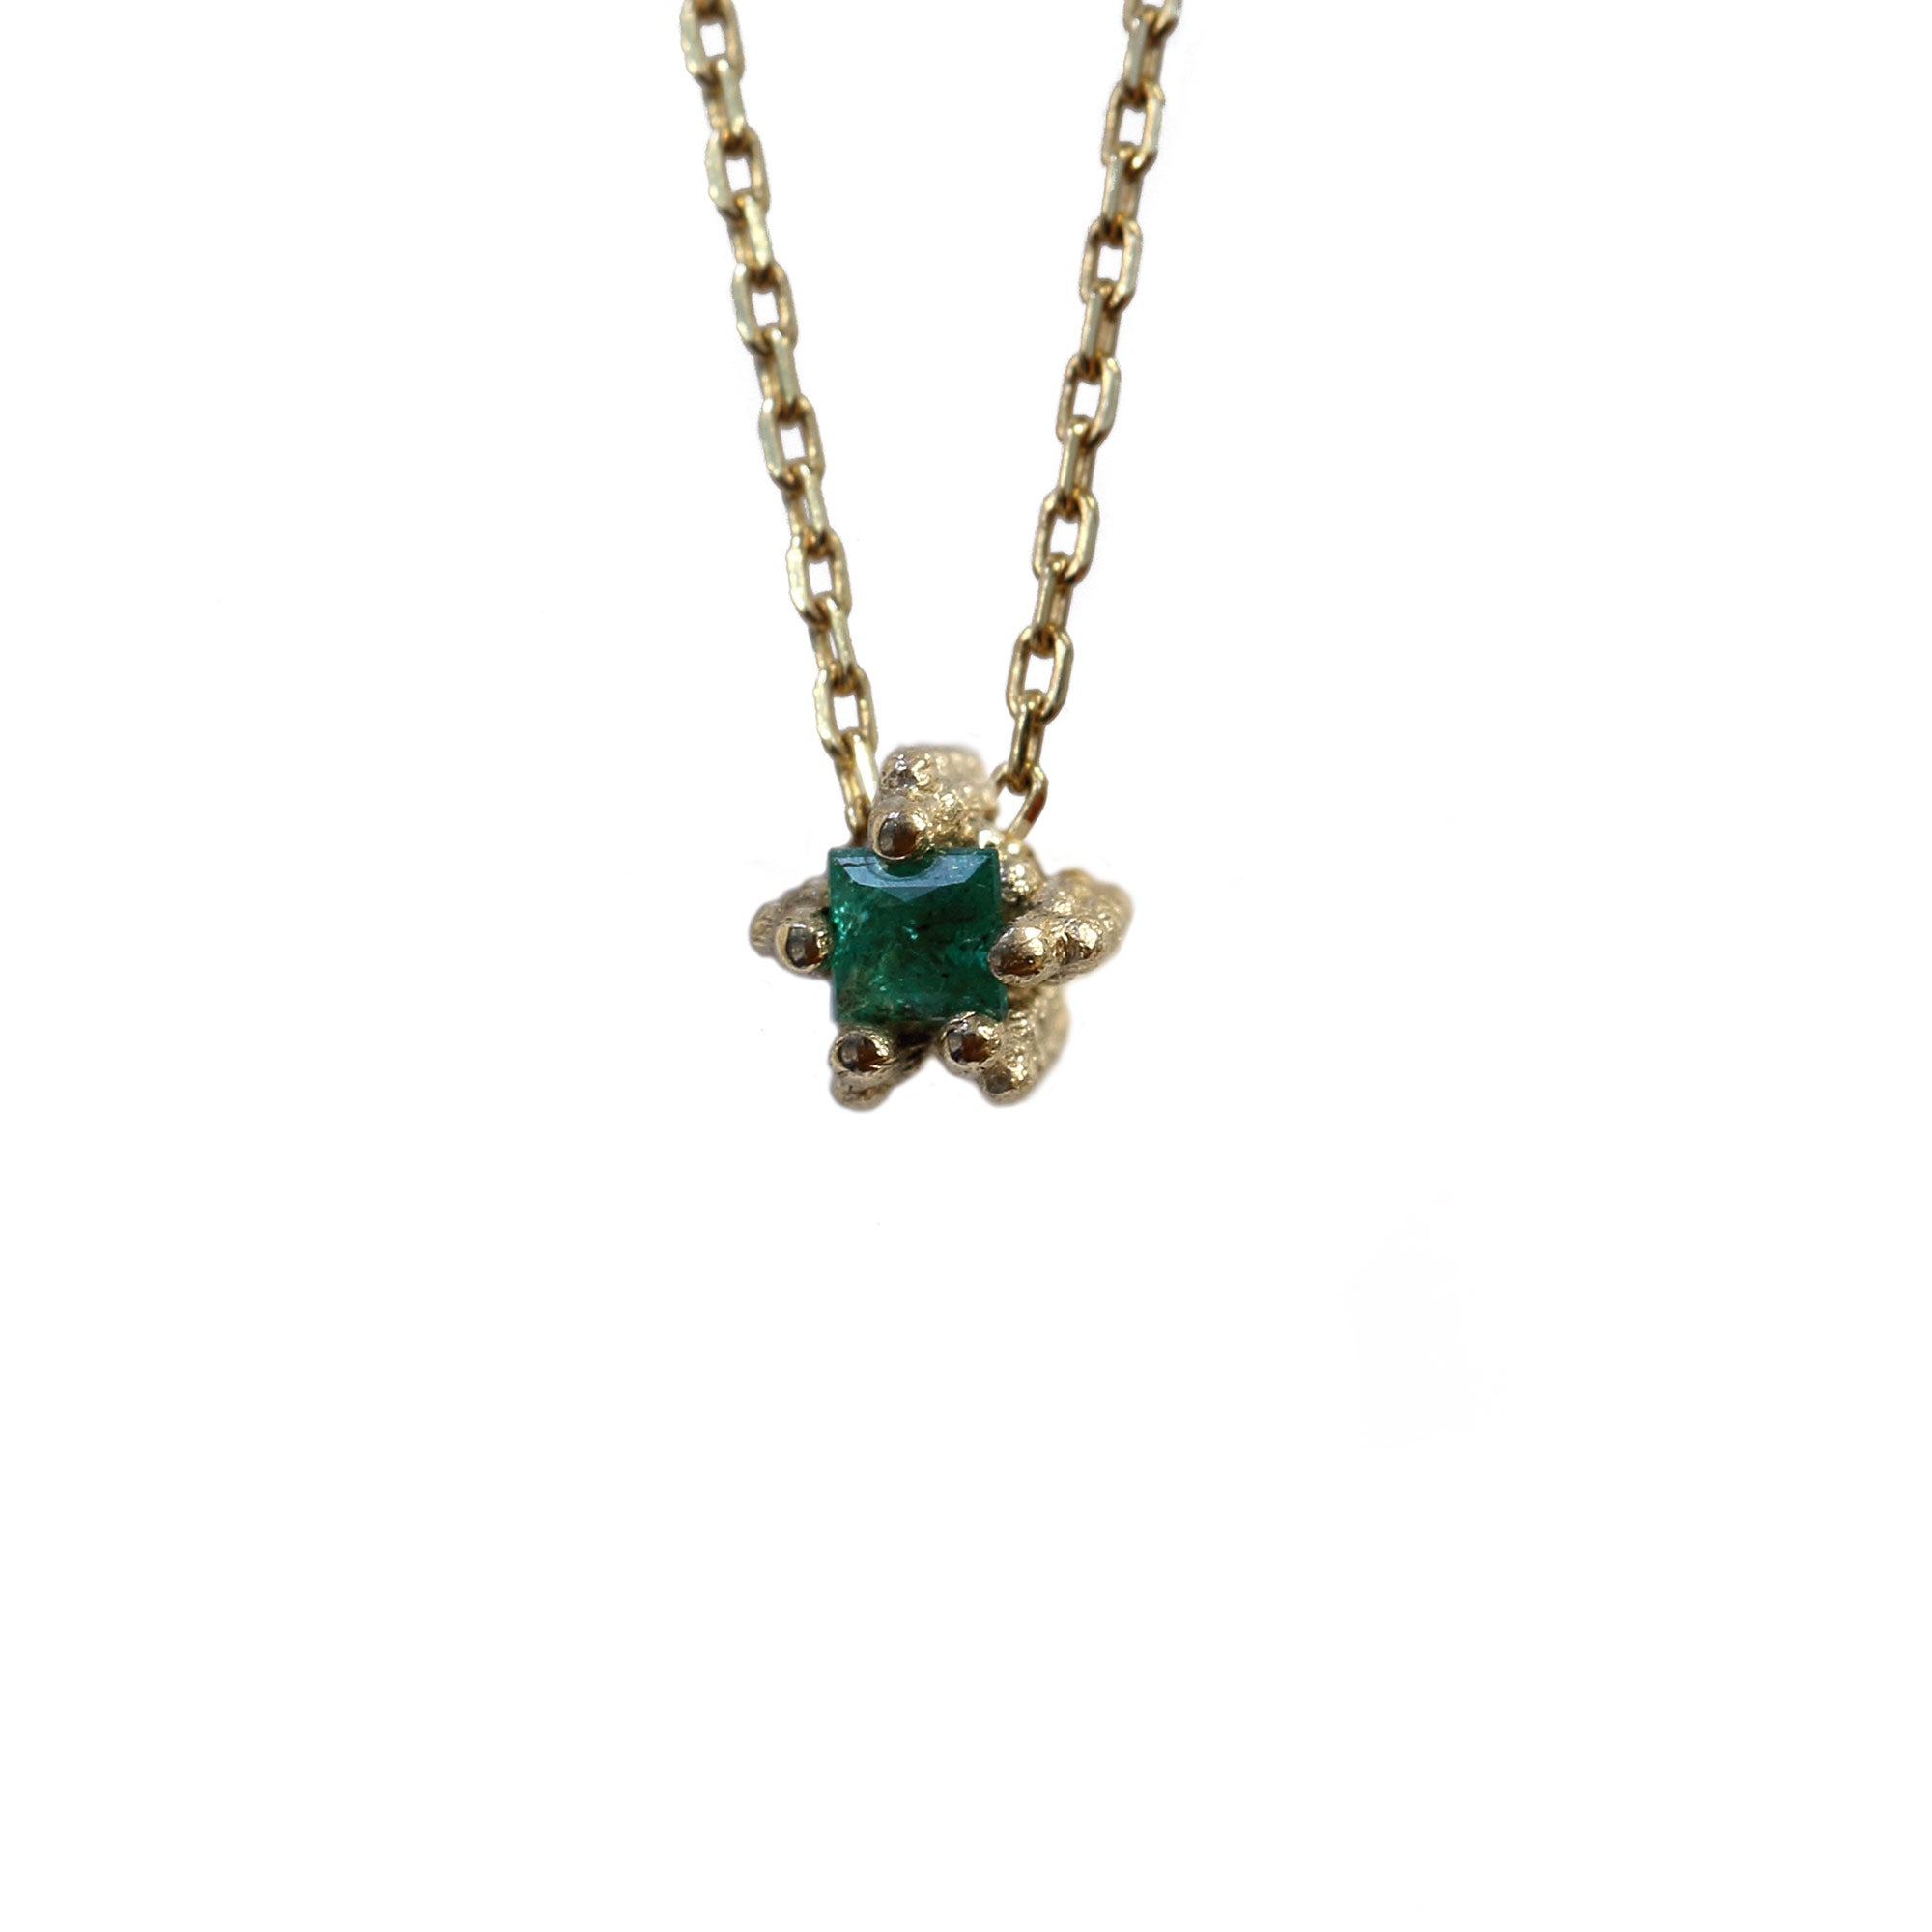 Tiny square cut emerald set in textured gold necklace on white background